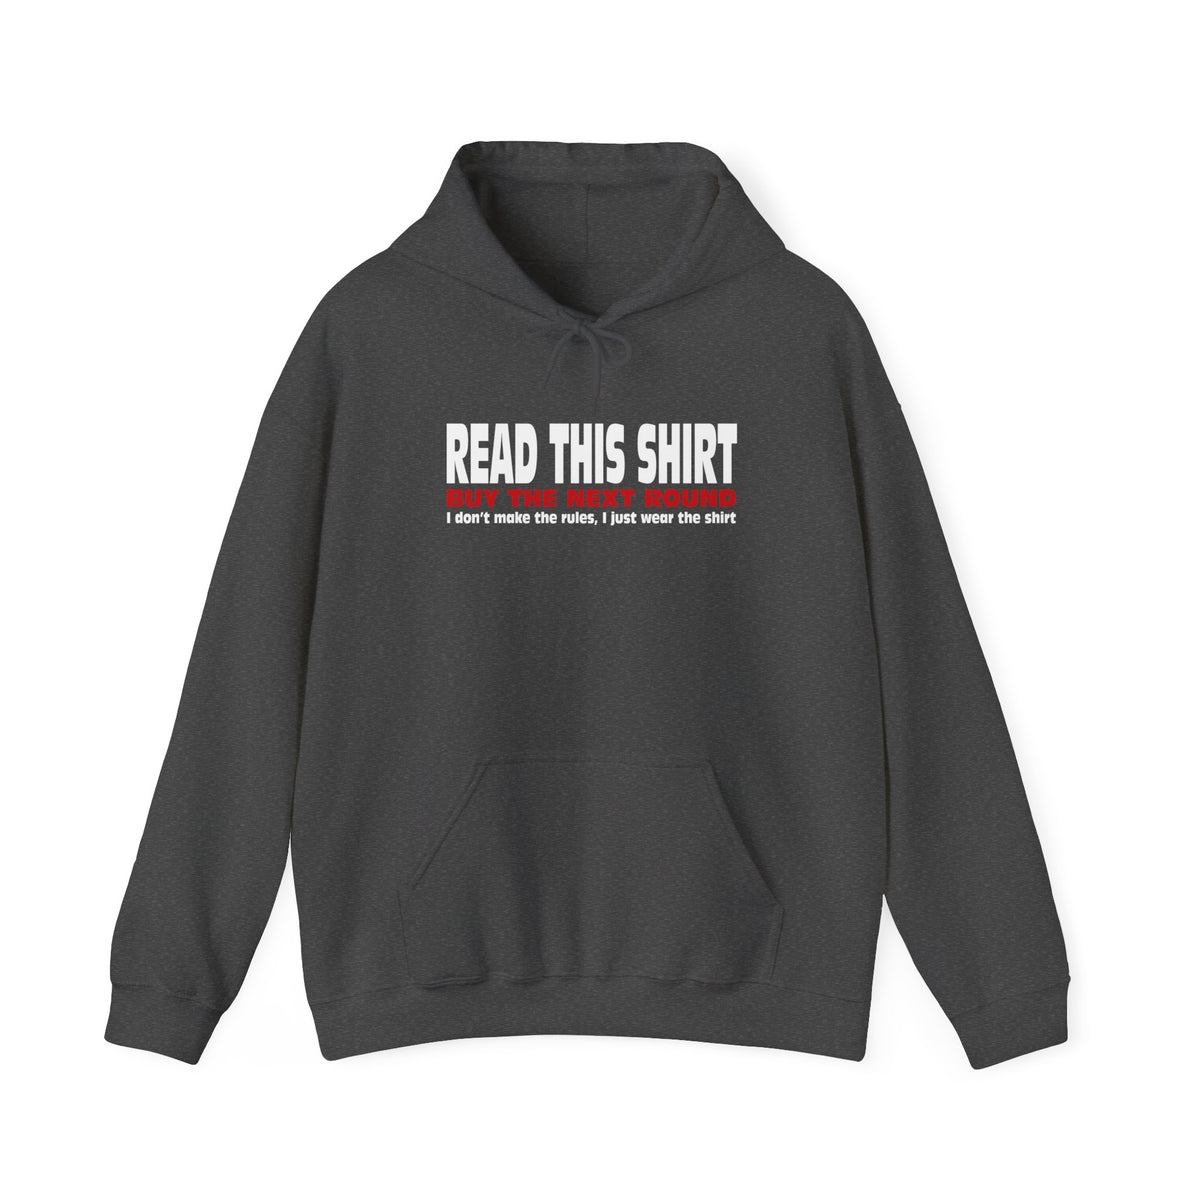 Read This Shirt Buy The Next Round. I Don't Make The Rules I Just Wear The Shirt - Hoodie